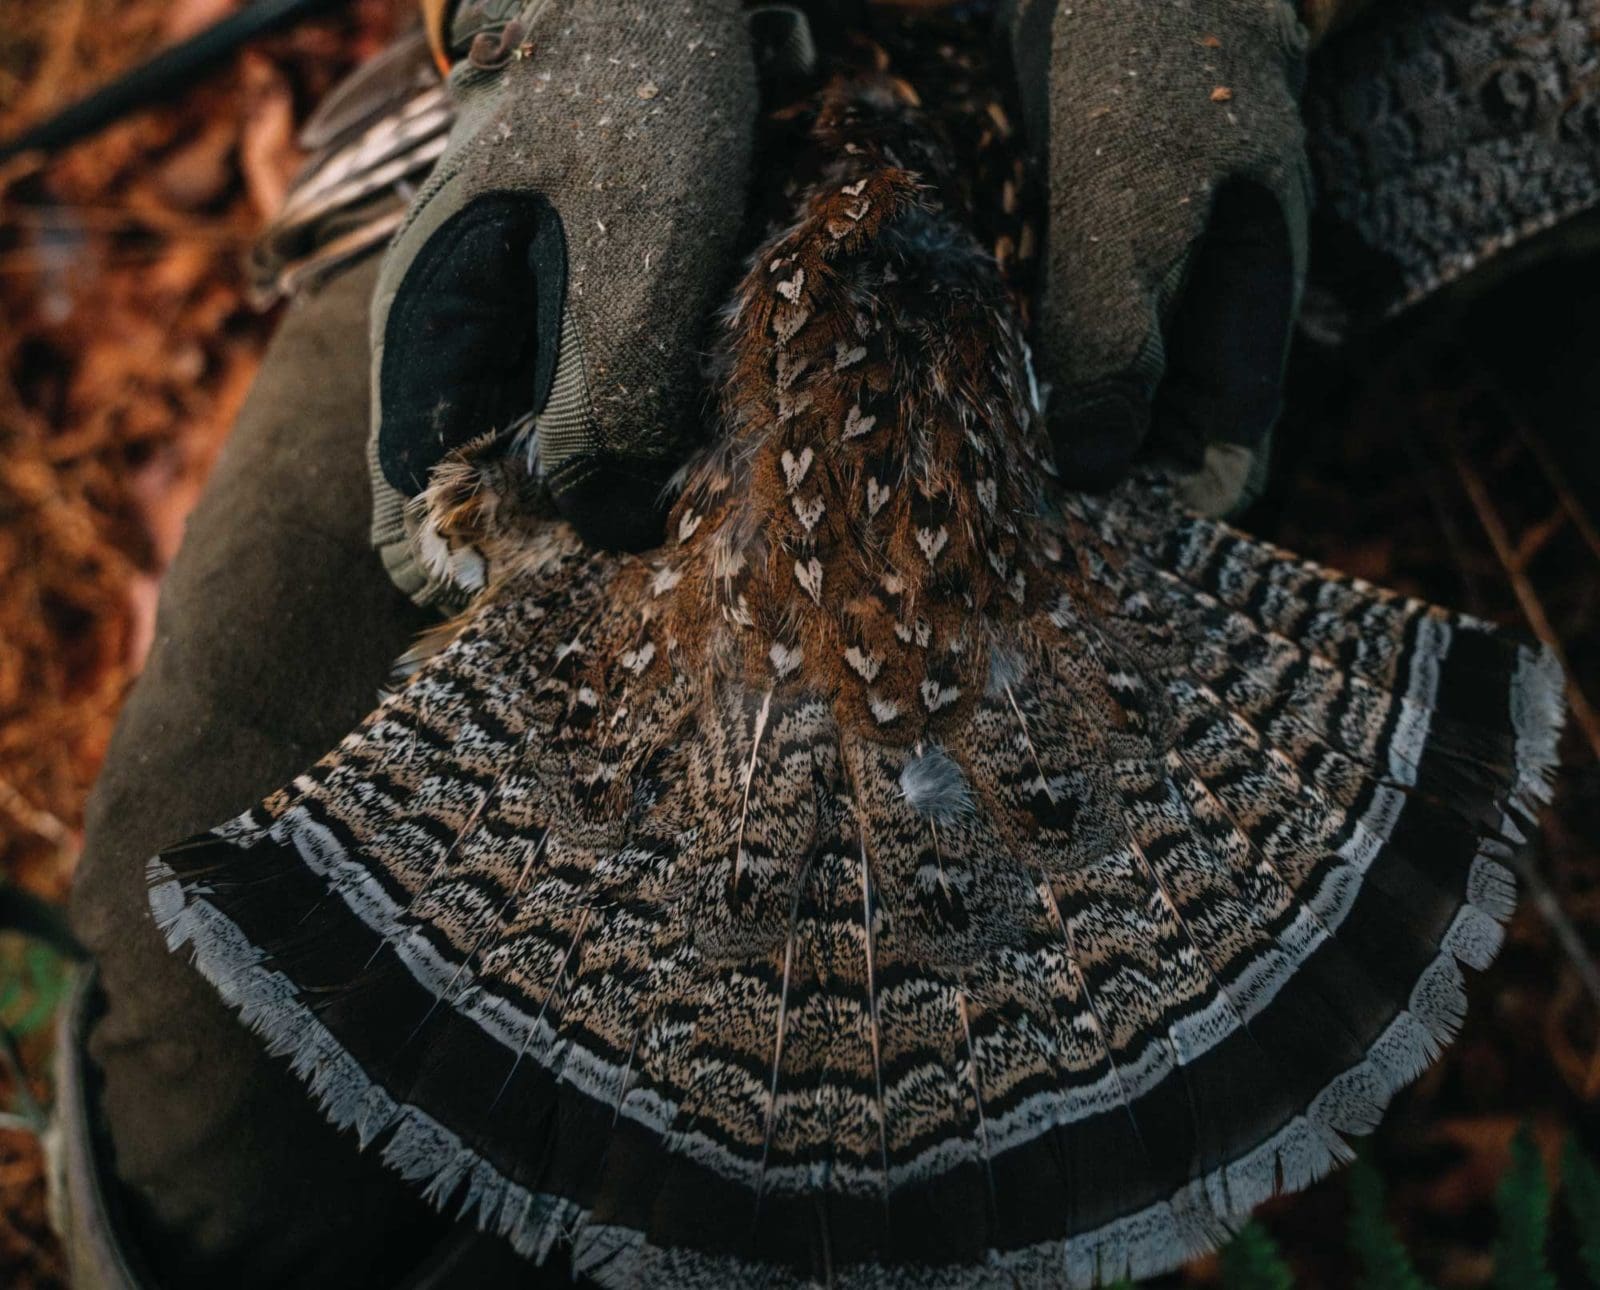 Ruffed grouse king of the game birds